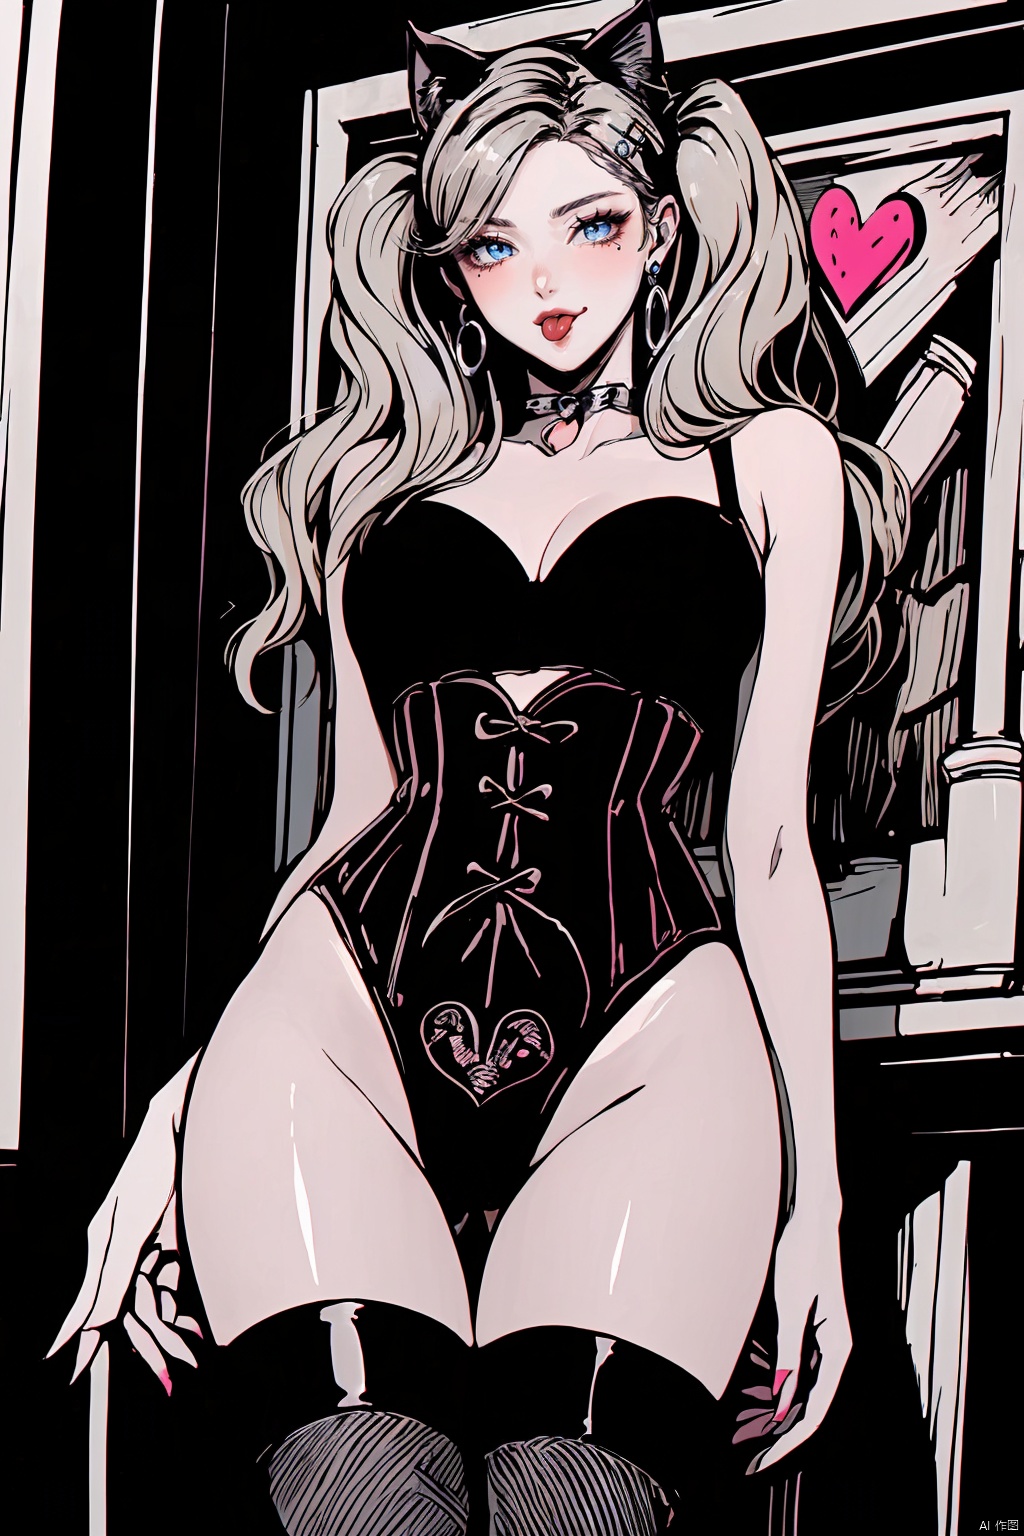  8k, masterpiece, best quality, highly detailed, 1 girl, solo, corset, no pants, thong panties, fishnets, {(high contrast), (highsaturation), red black theme, (red black white tone)}, {(woodcut:1.4), flat color, doodle}.
blonde hair,blue eyes, crimson lips,alluring makeup,earrings, a nevus near right eye, 
ogling at viewer, blushing, {(Flirting naughty face, blonde hair,blue eyes, crimson lips,alluring makeup, earrings,
ogling at viewer, blushing, {(Flirting naughty face, (wink:1.5),(cat ears, tongue out, detailed tongue:1.4)), (sexual suggestion expression, messy bangs, (blushing with desire:1.3), flirtatious glance(eyes brimming with allure:1.2))},
long hair,{twintails,(low twintail)},hair ornament, hairclip, punk, smooth lines, (one hand flipped back hair), sexy body, {(large breasts, slim waist, outward-curving hips:1.2),(plump thighs, slim calves)}, ((noticeable thigh_gap:1.1), cameltoe), attractive cleavage, {black thigh-high stockings,(digging into thigh flesh)}, feet wearing high heels or in stockings.
(cowboy shot:1.7), {(from below),(Wariza)}, Shifengji, flat, many Heart-shaped bubbles ＆ many ❤❤❤, anime